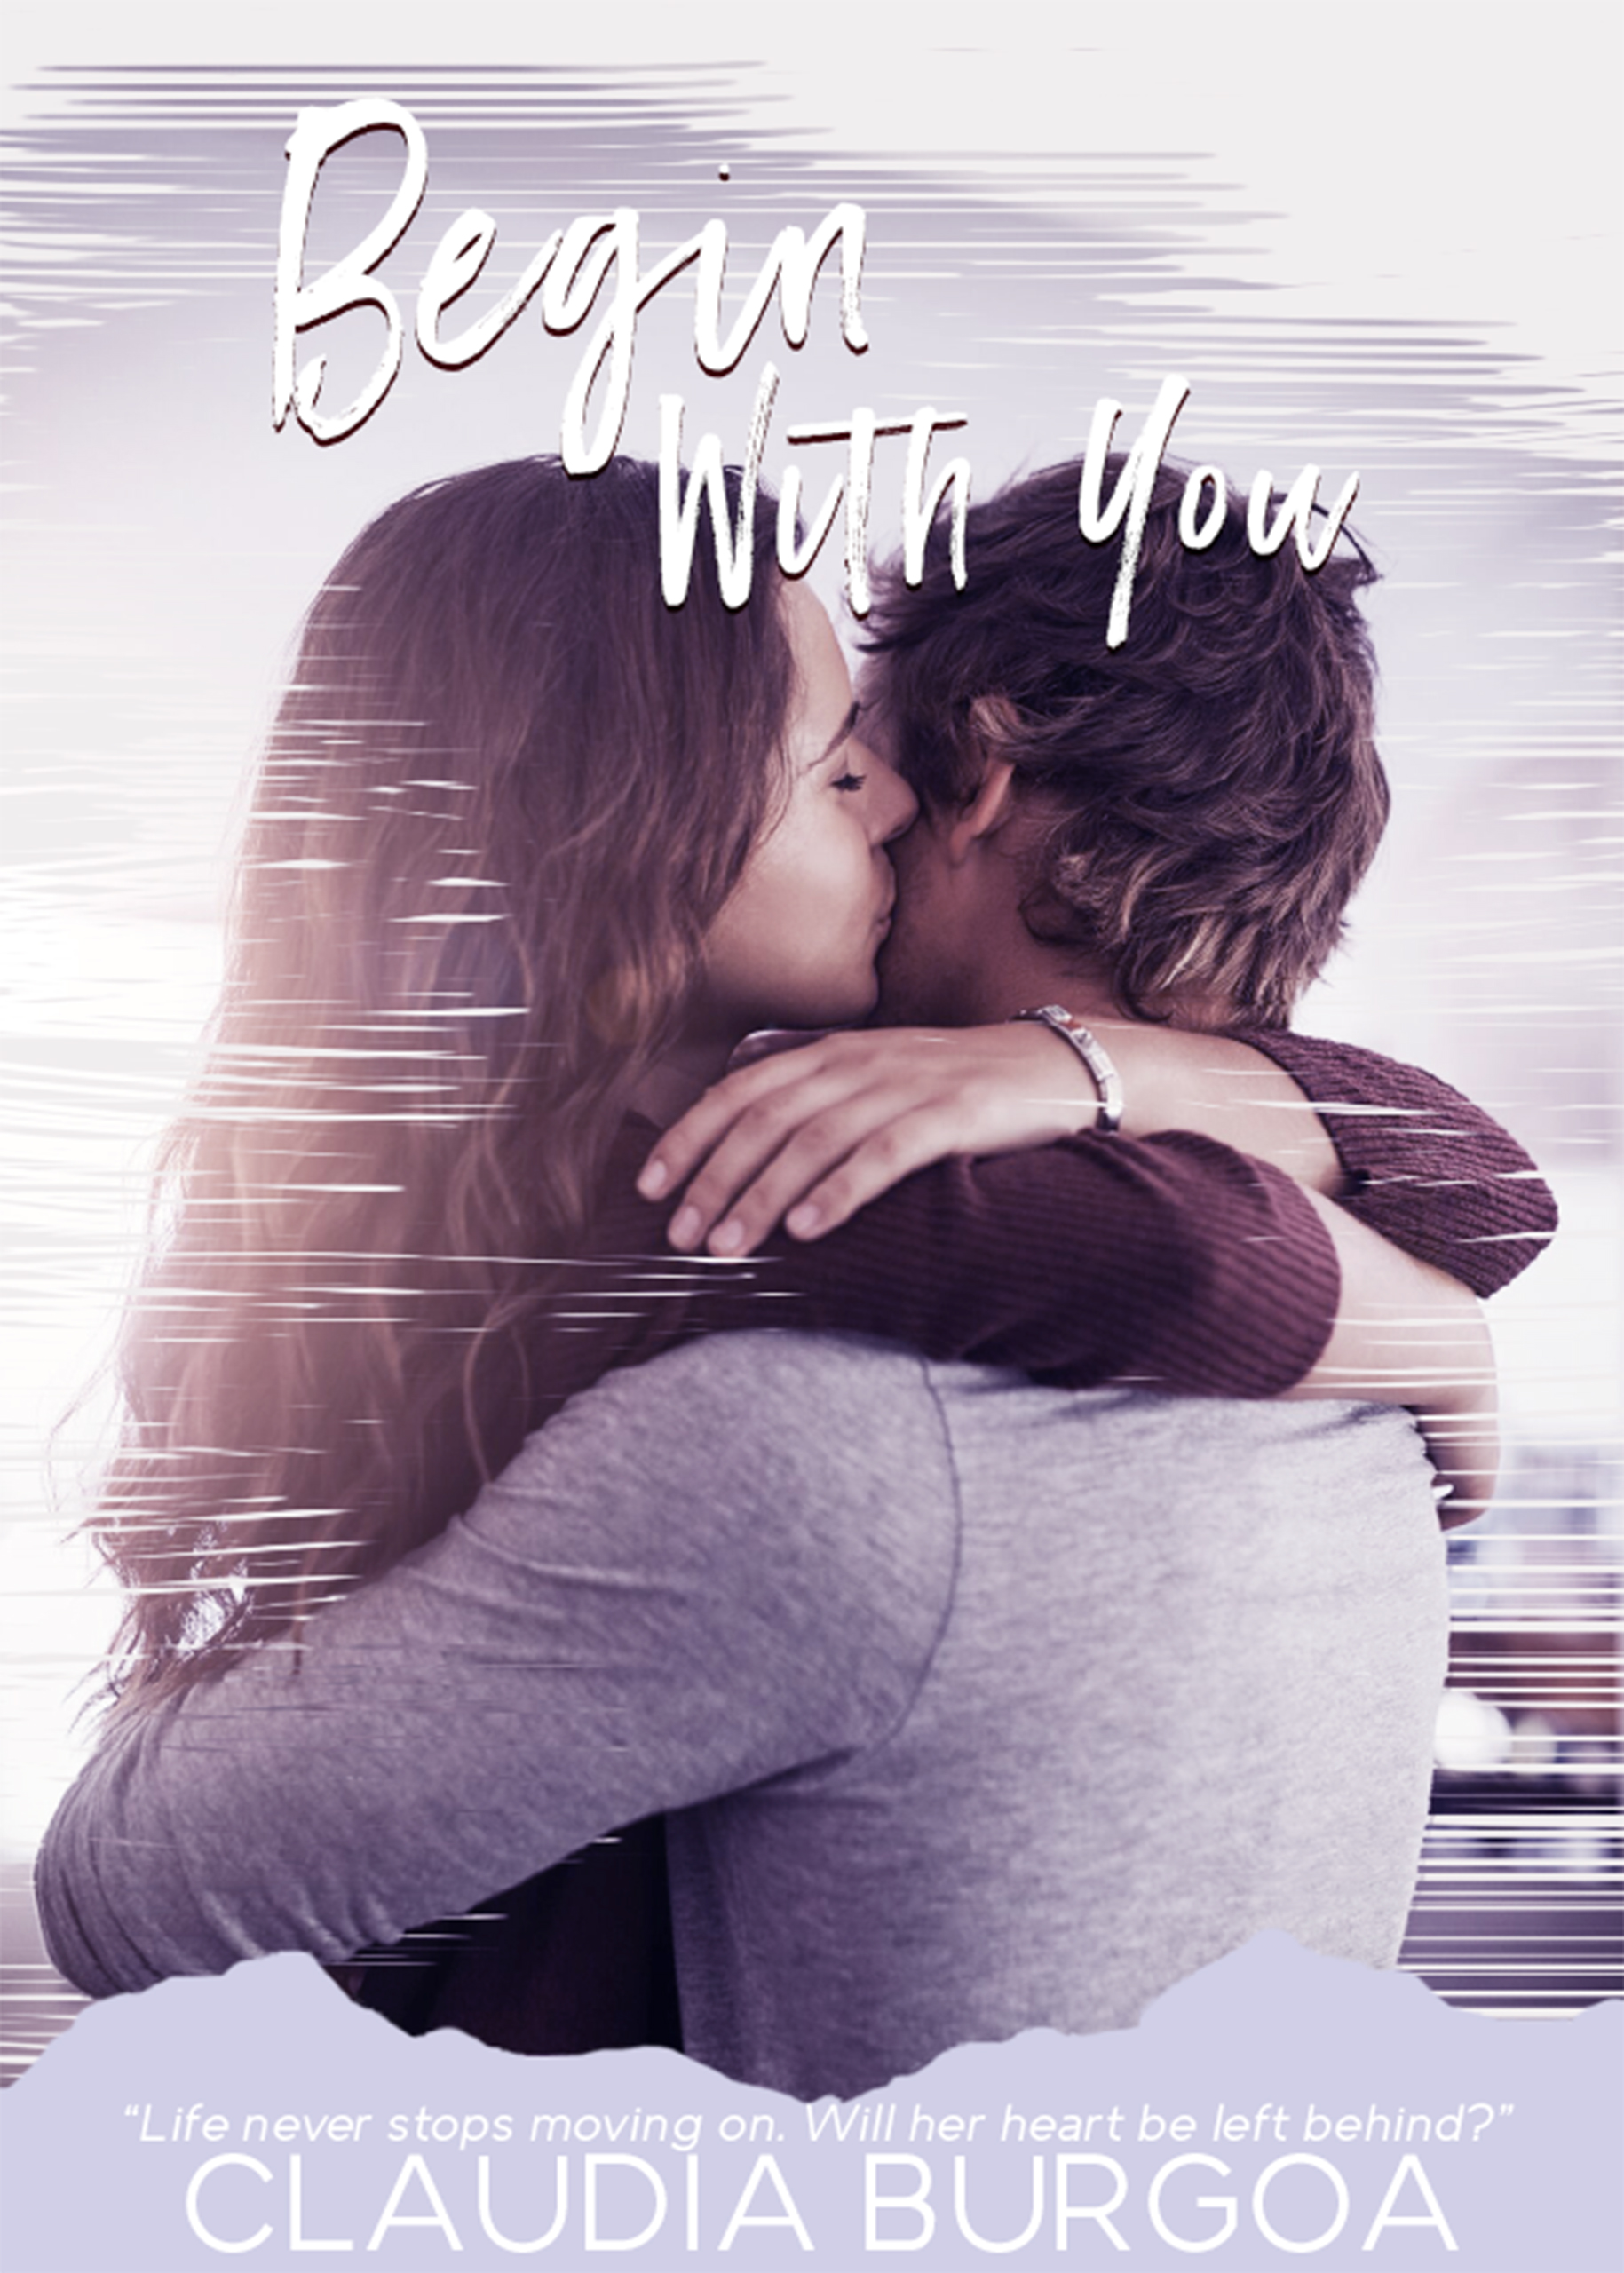 Begin With You/Back To You (Chaotic Love duet) by Claudia Burgoa [Cover Reveal]